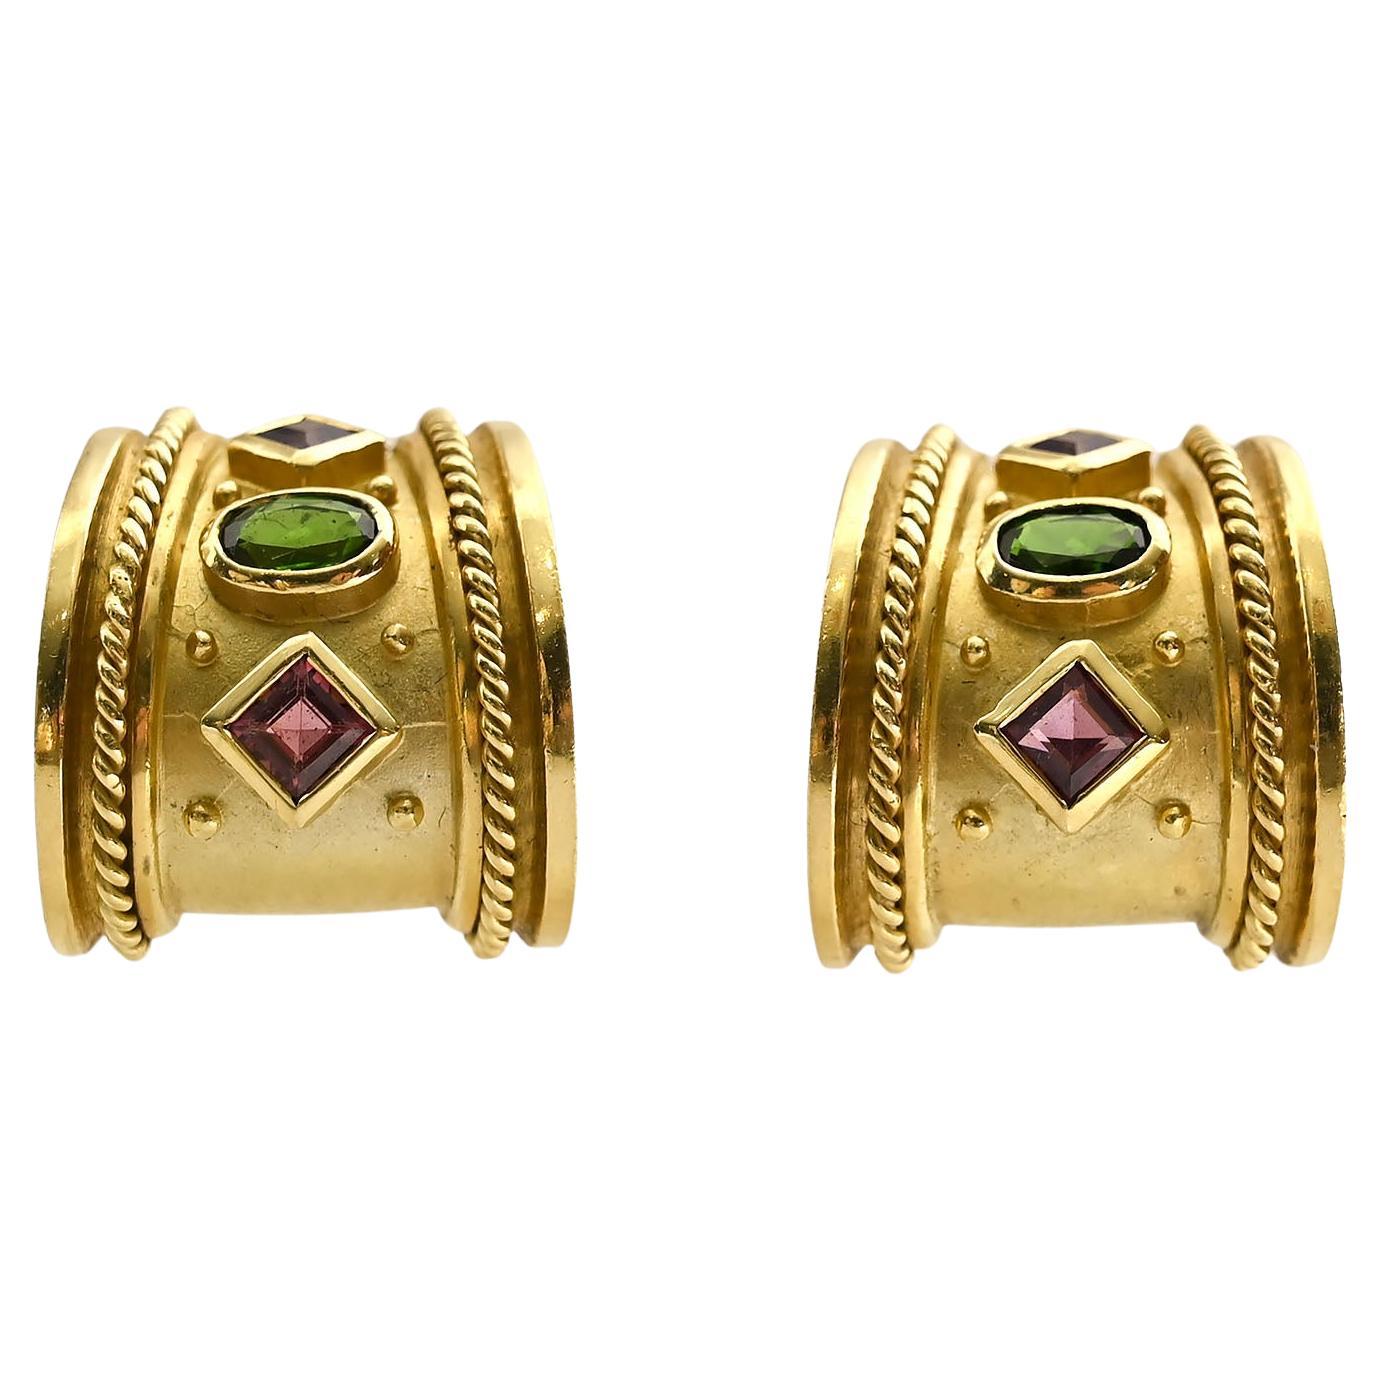 Seidengang Gold Earrings with Gemstones For Sale